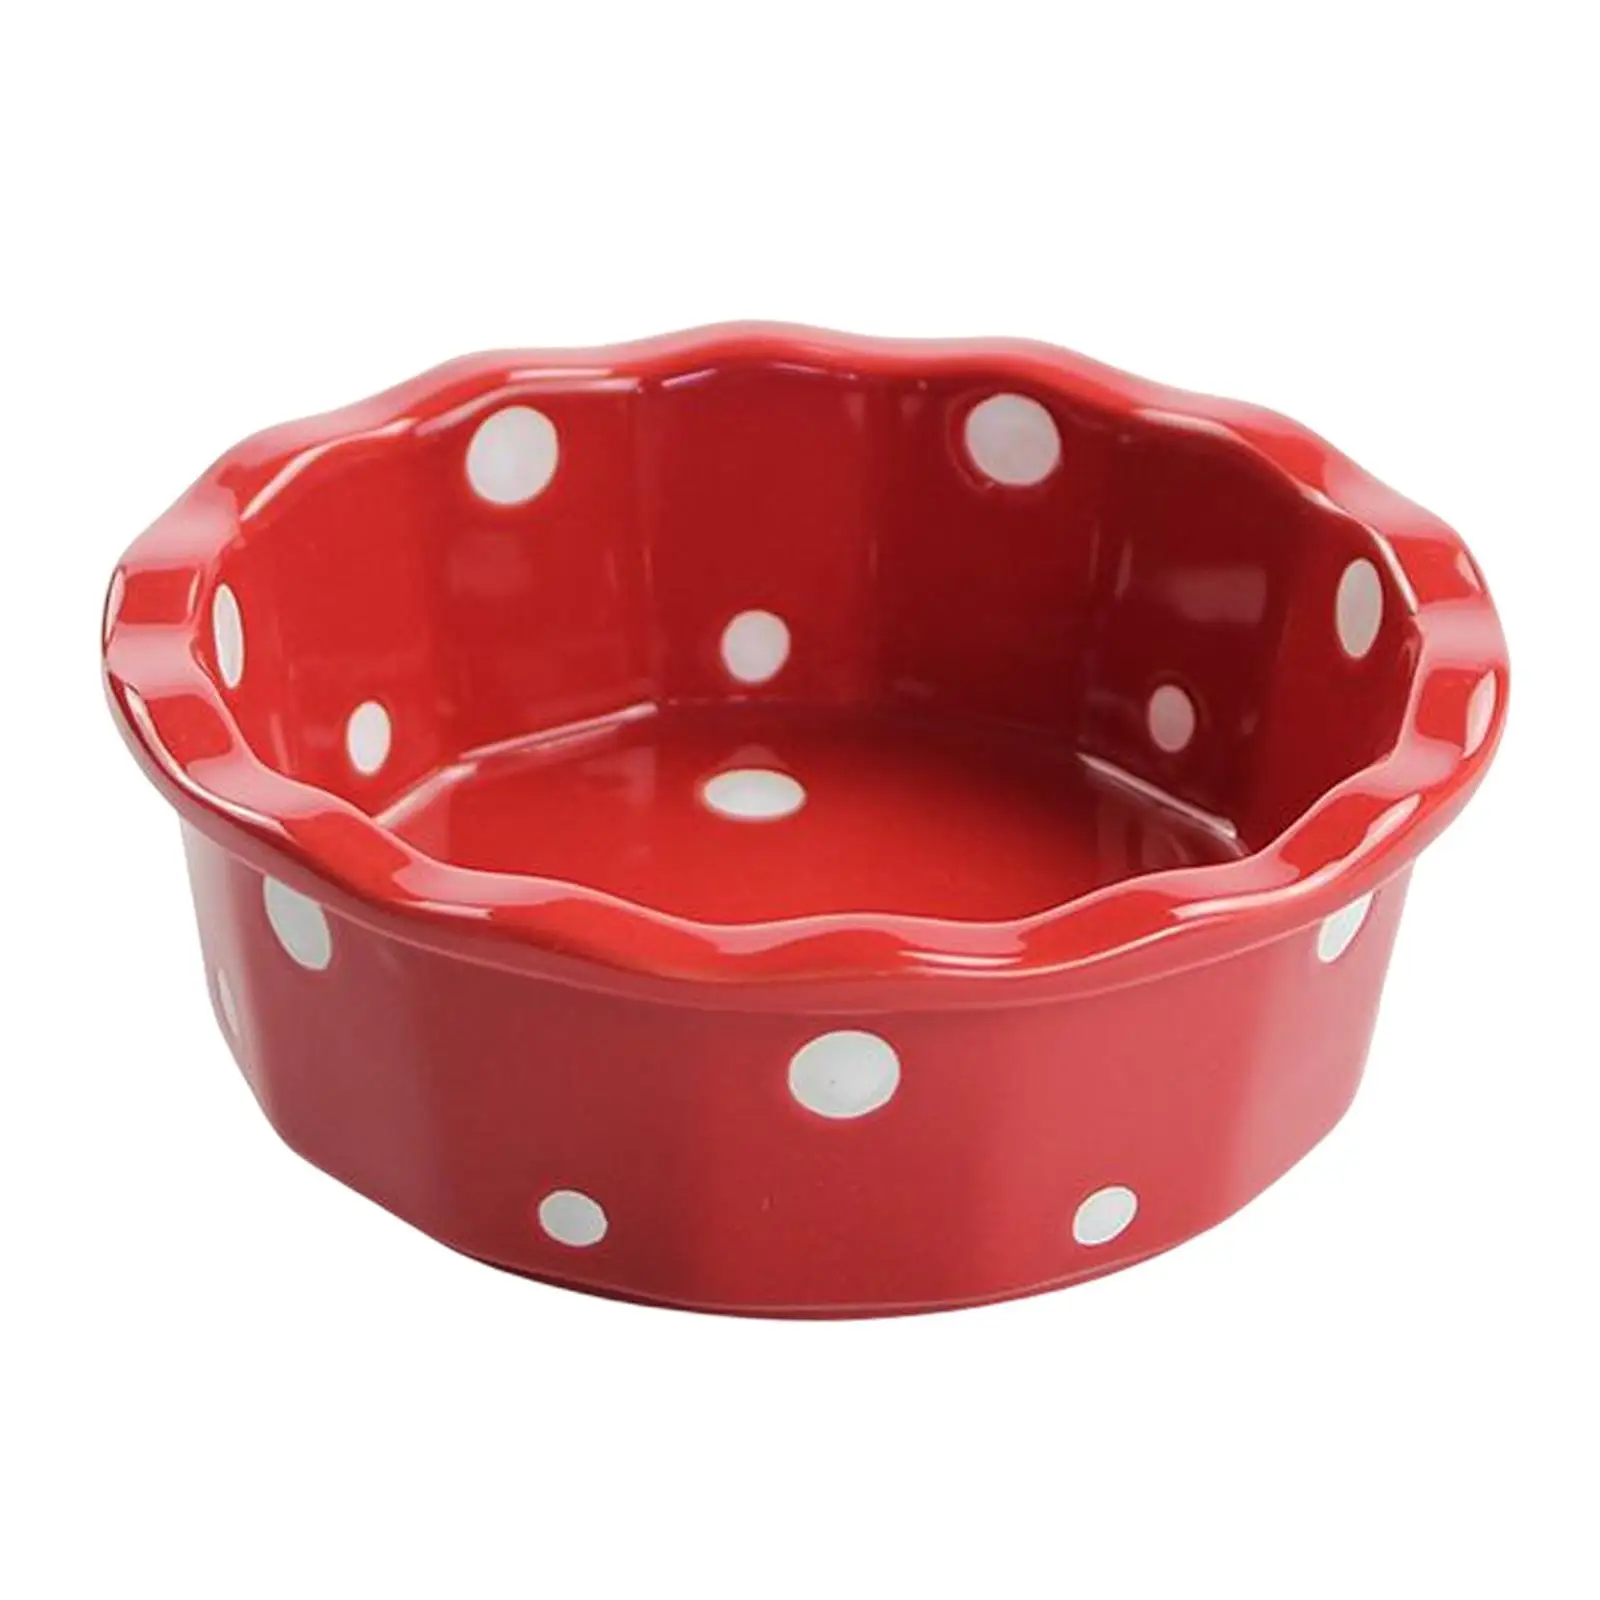 Cute Cat Bowl Pet Feeding Station Pet Bowl Cat Food Plate Water Bowl Food Container Water Dispenser Pet Feeder for Kitten Puppy